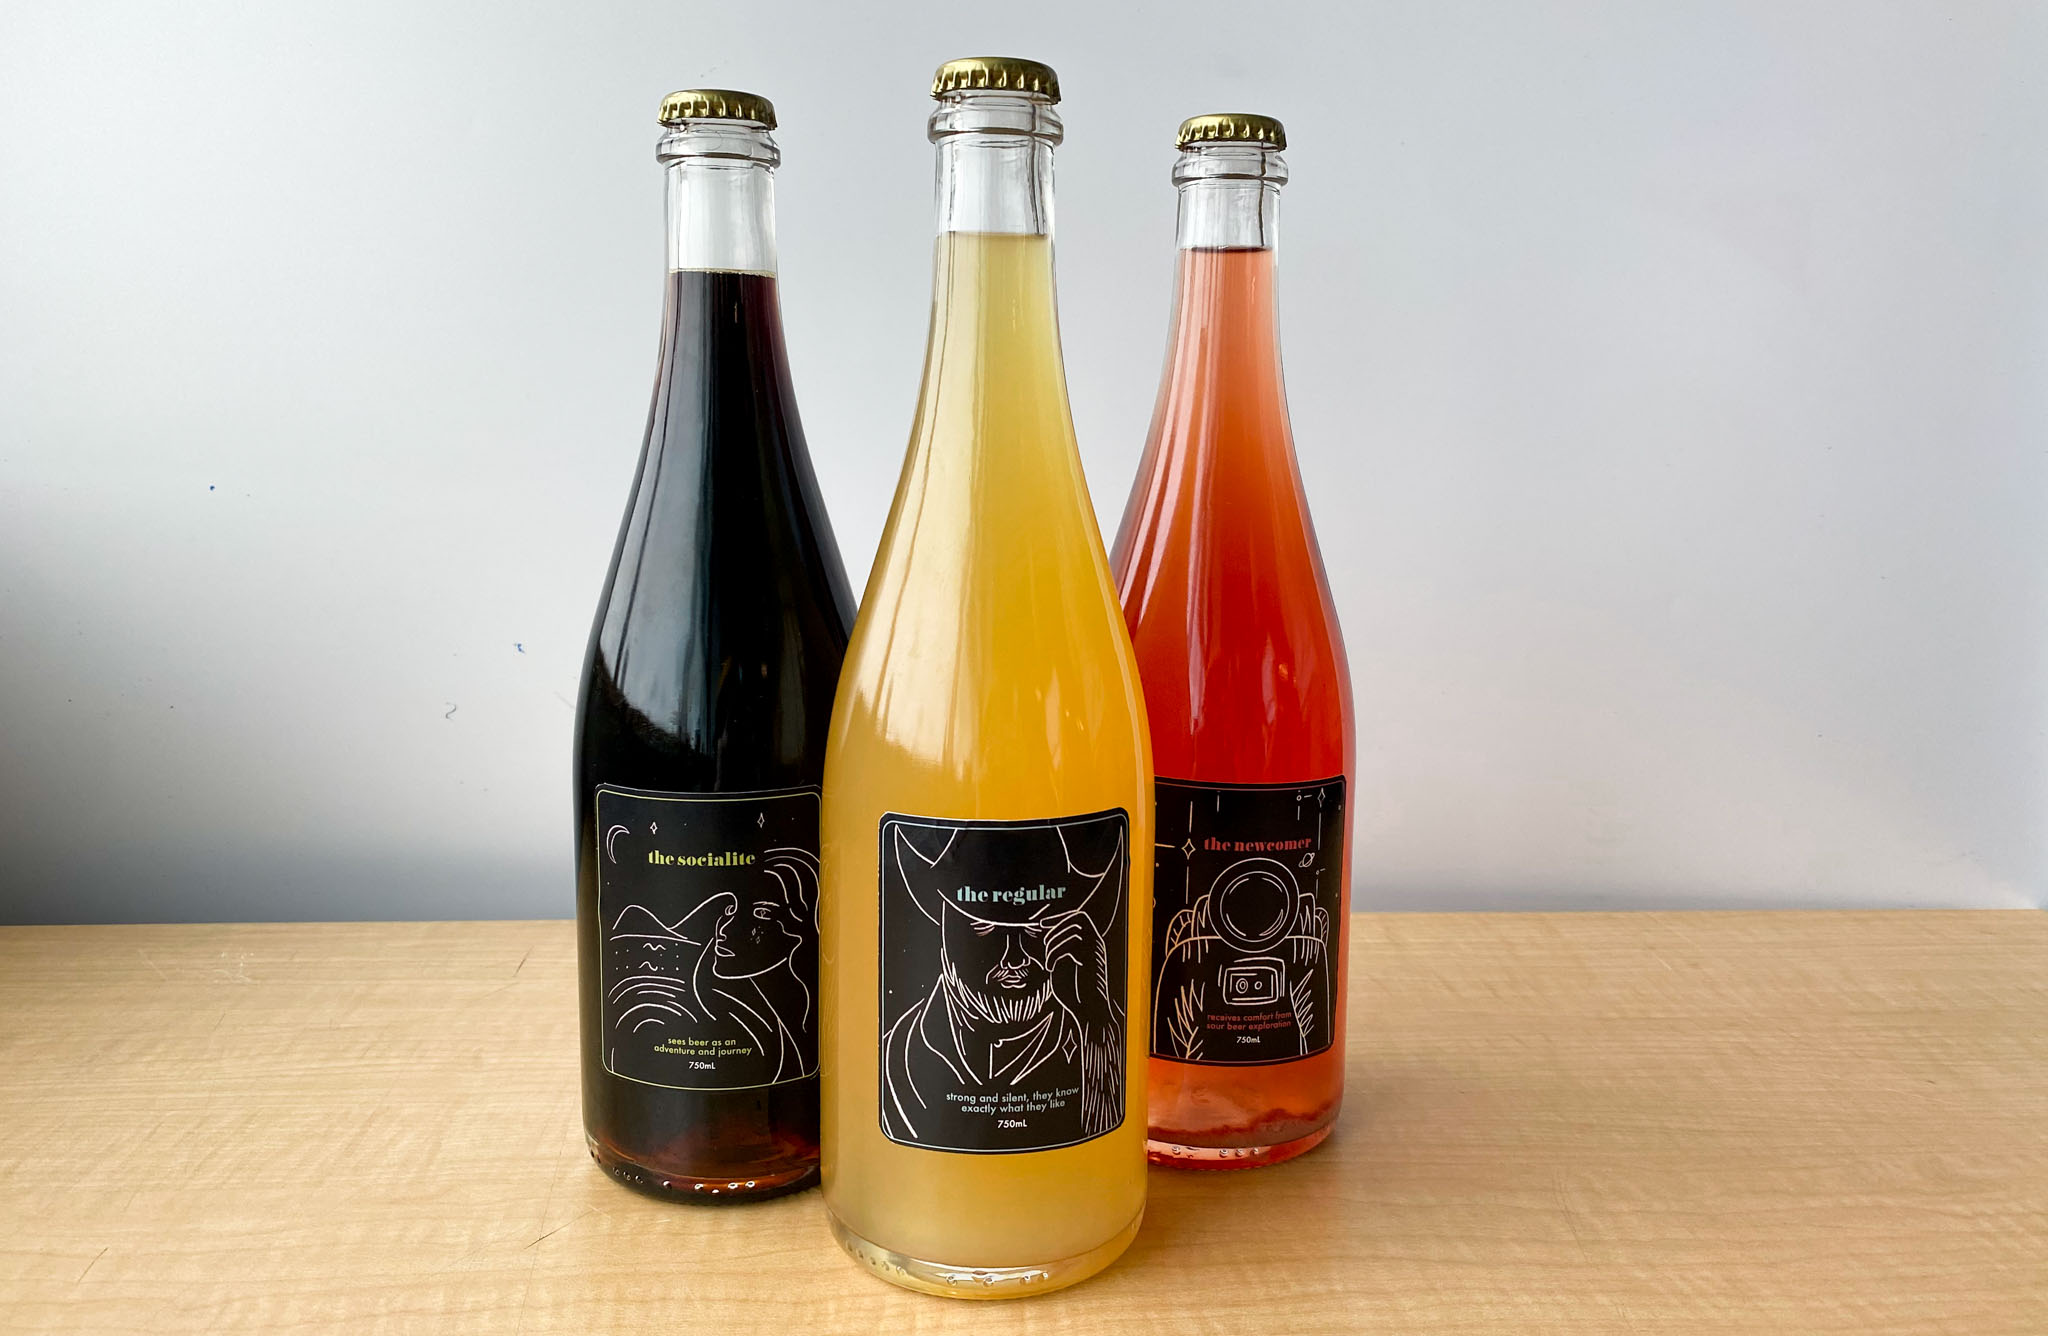 3 bottles representing the newcomer, the regular, and the socialite